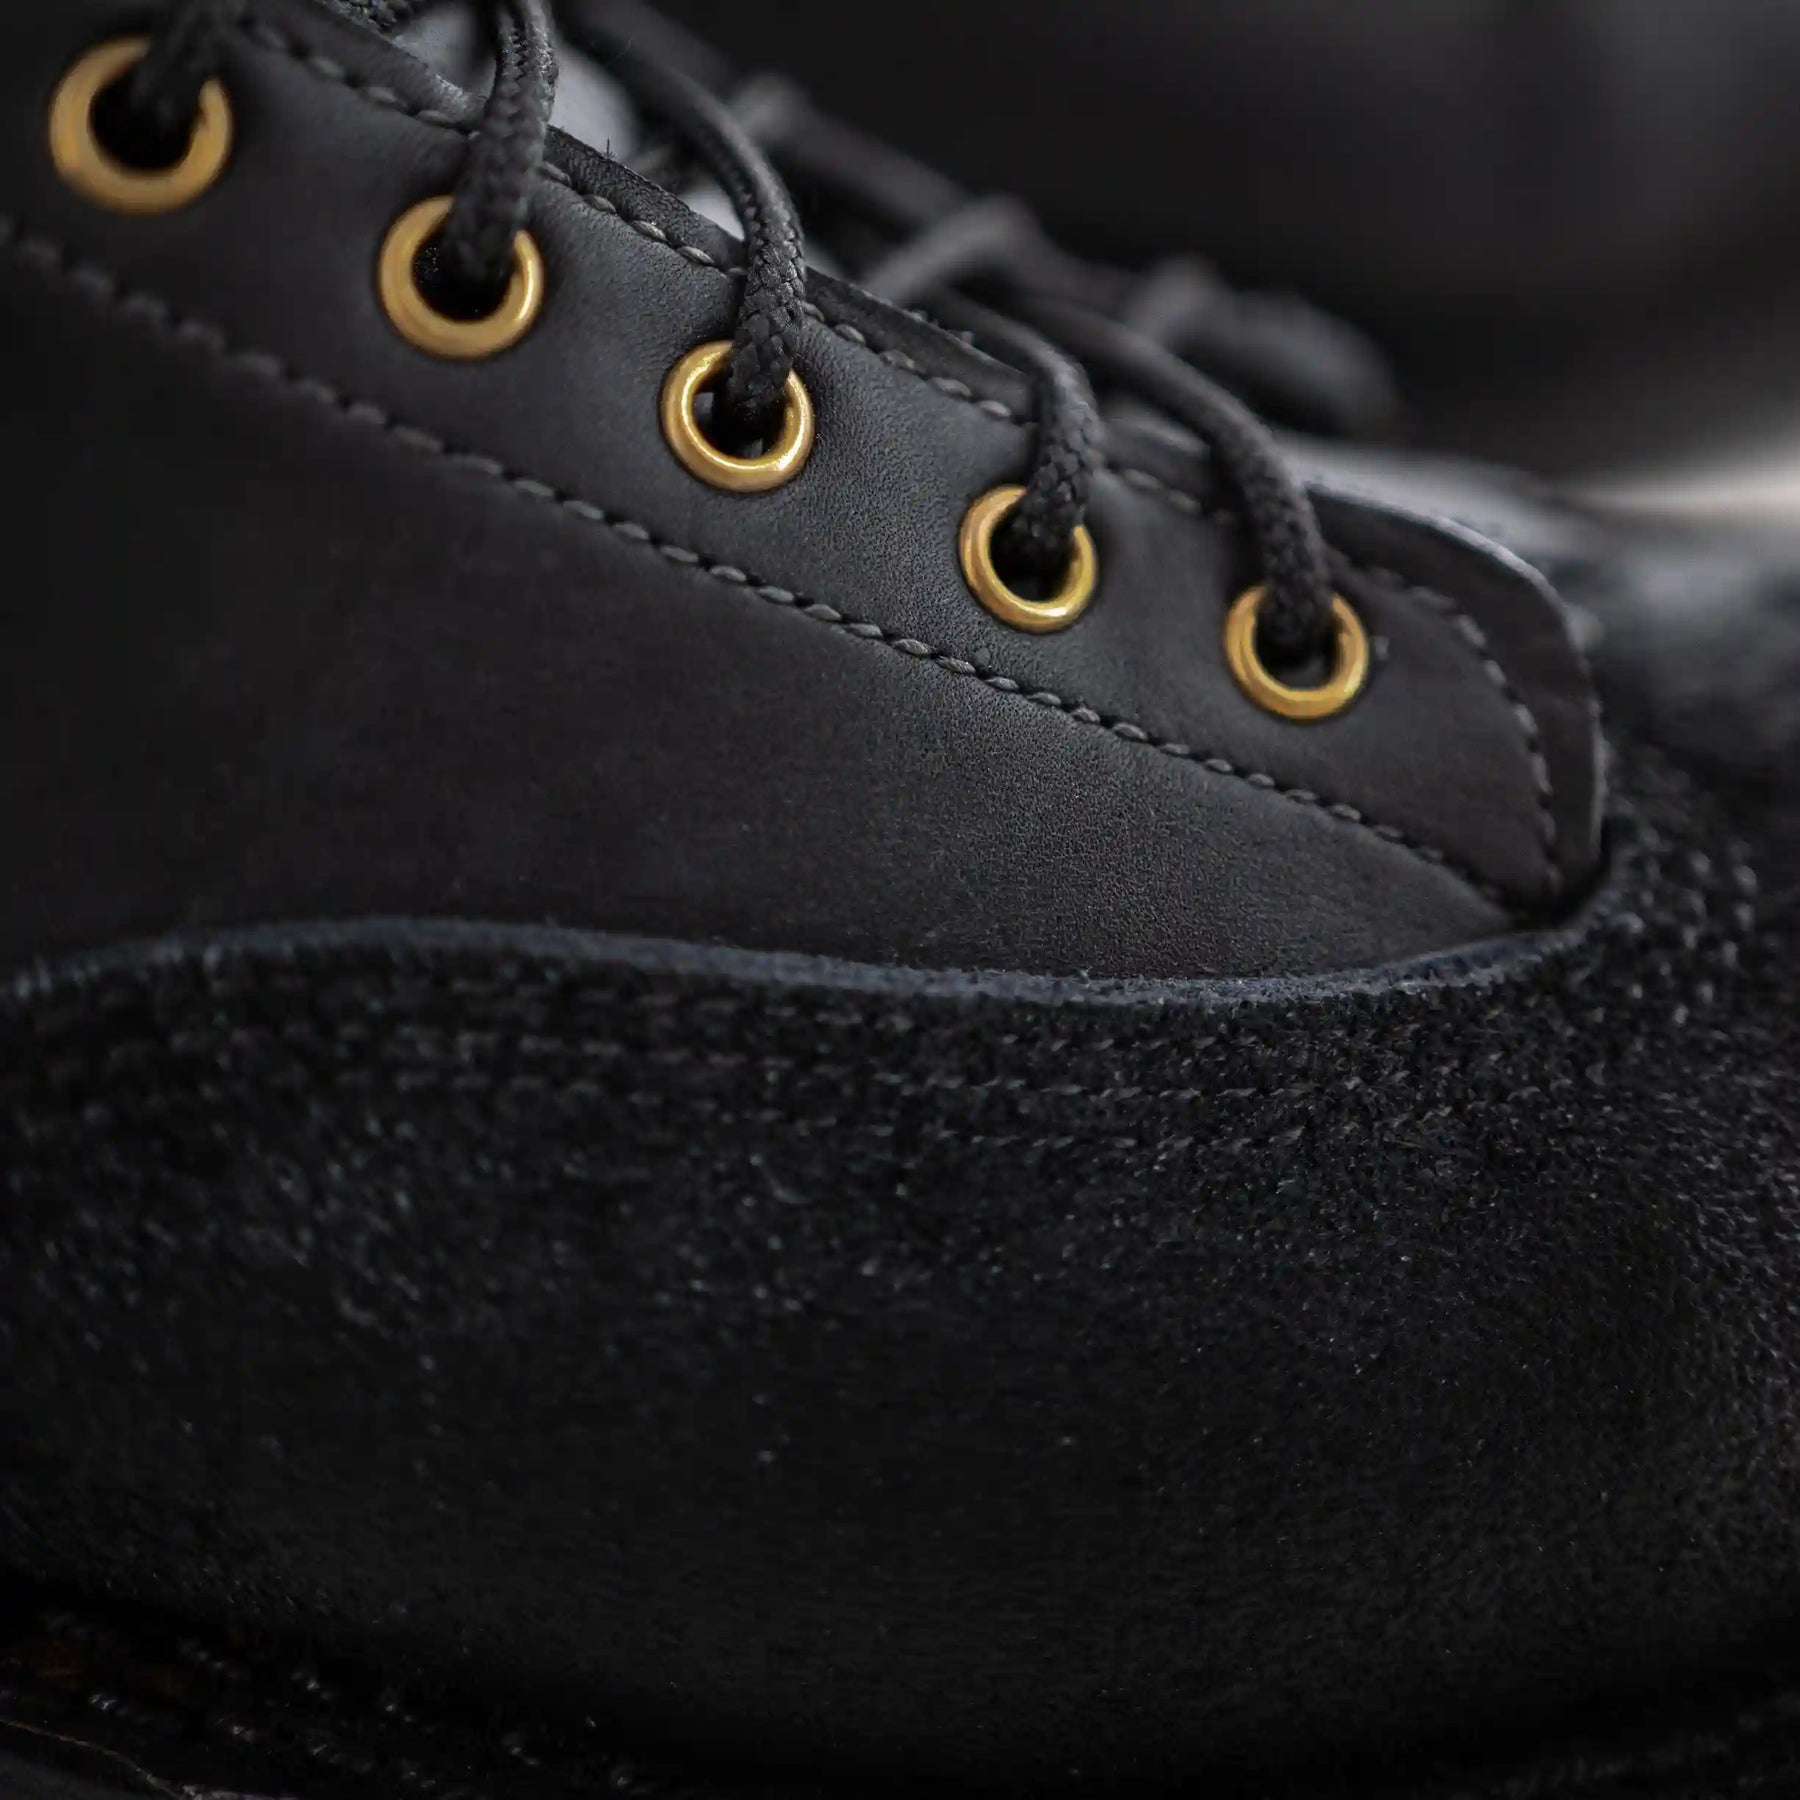 close up image of black fire inlander boot from jk boots